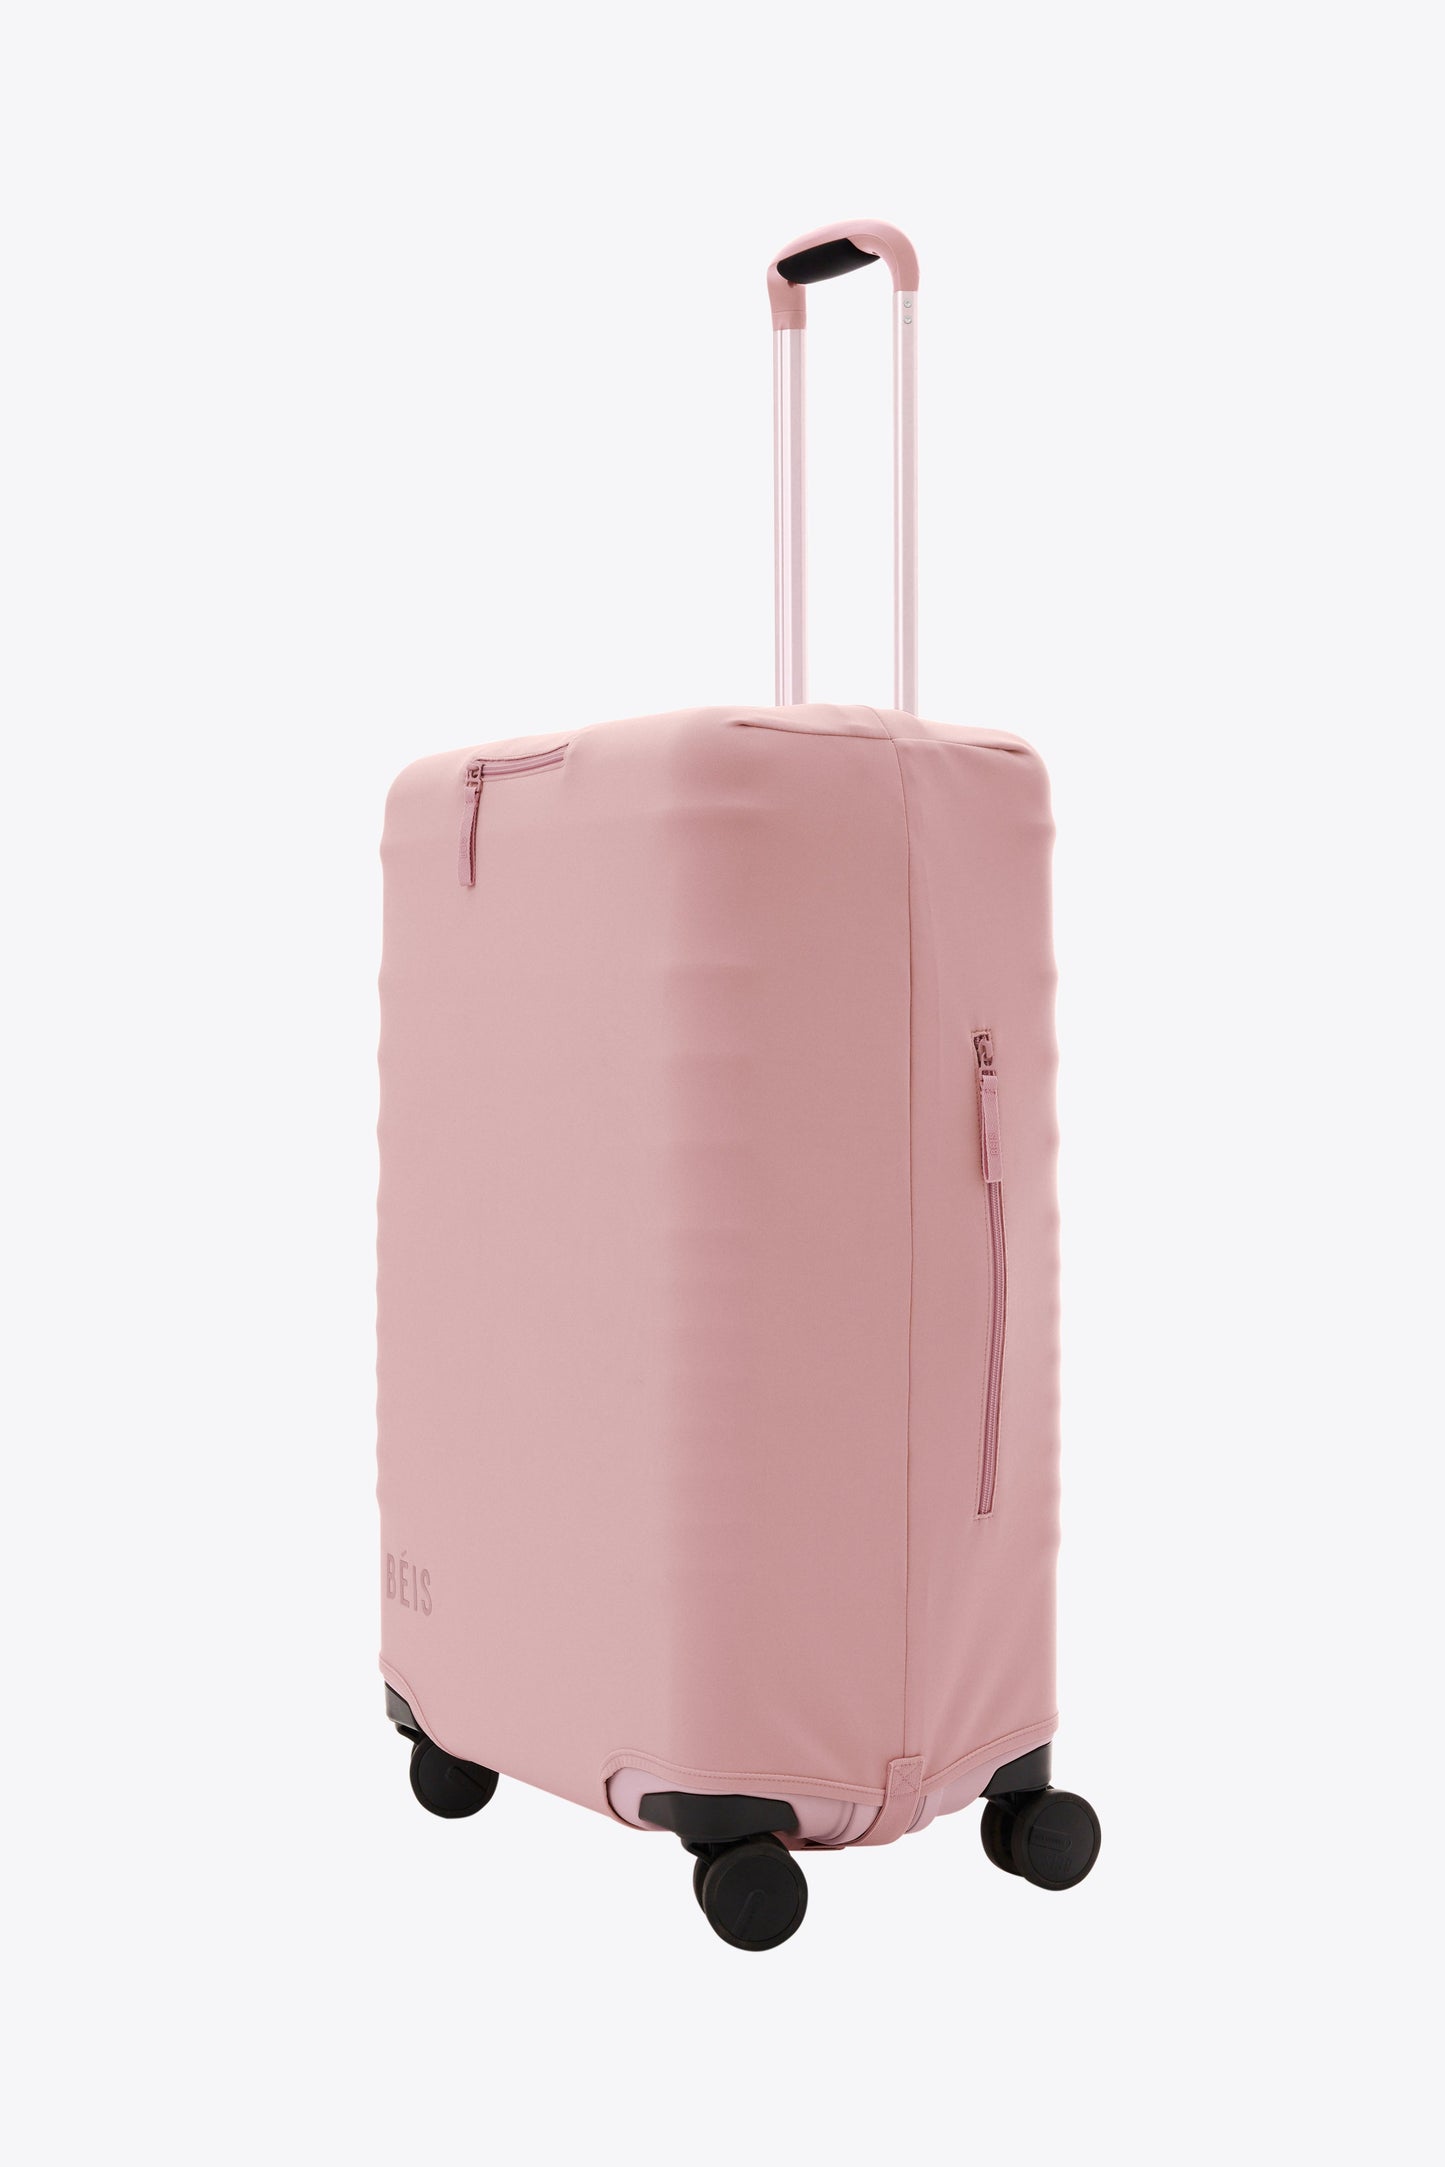 The Medium Check-In Luggage Cover in Atlas Pink